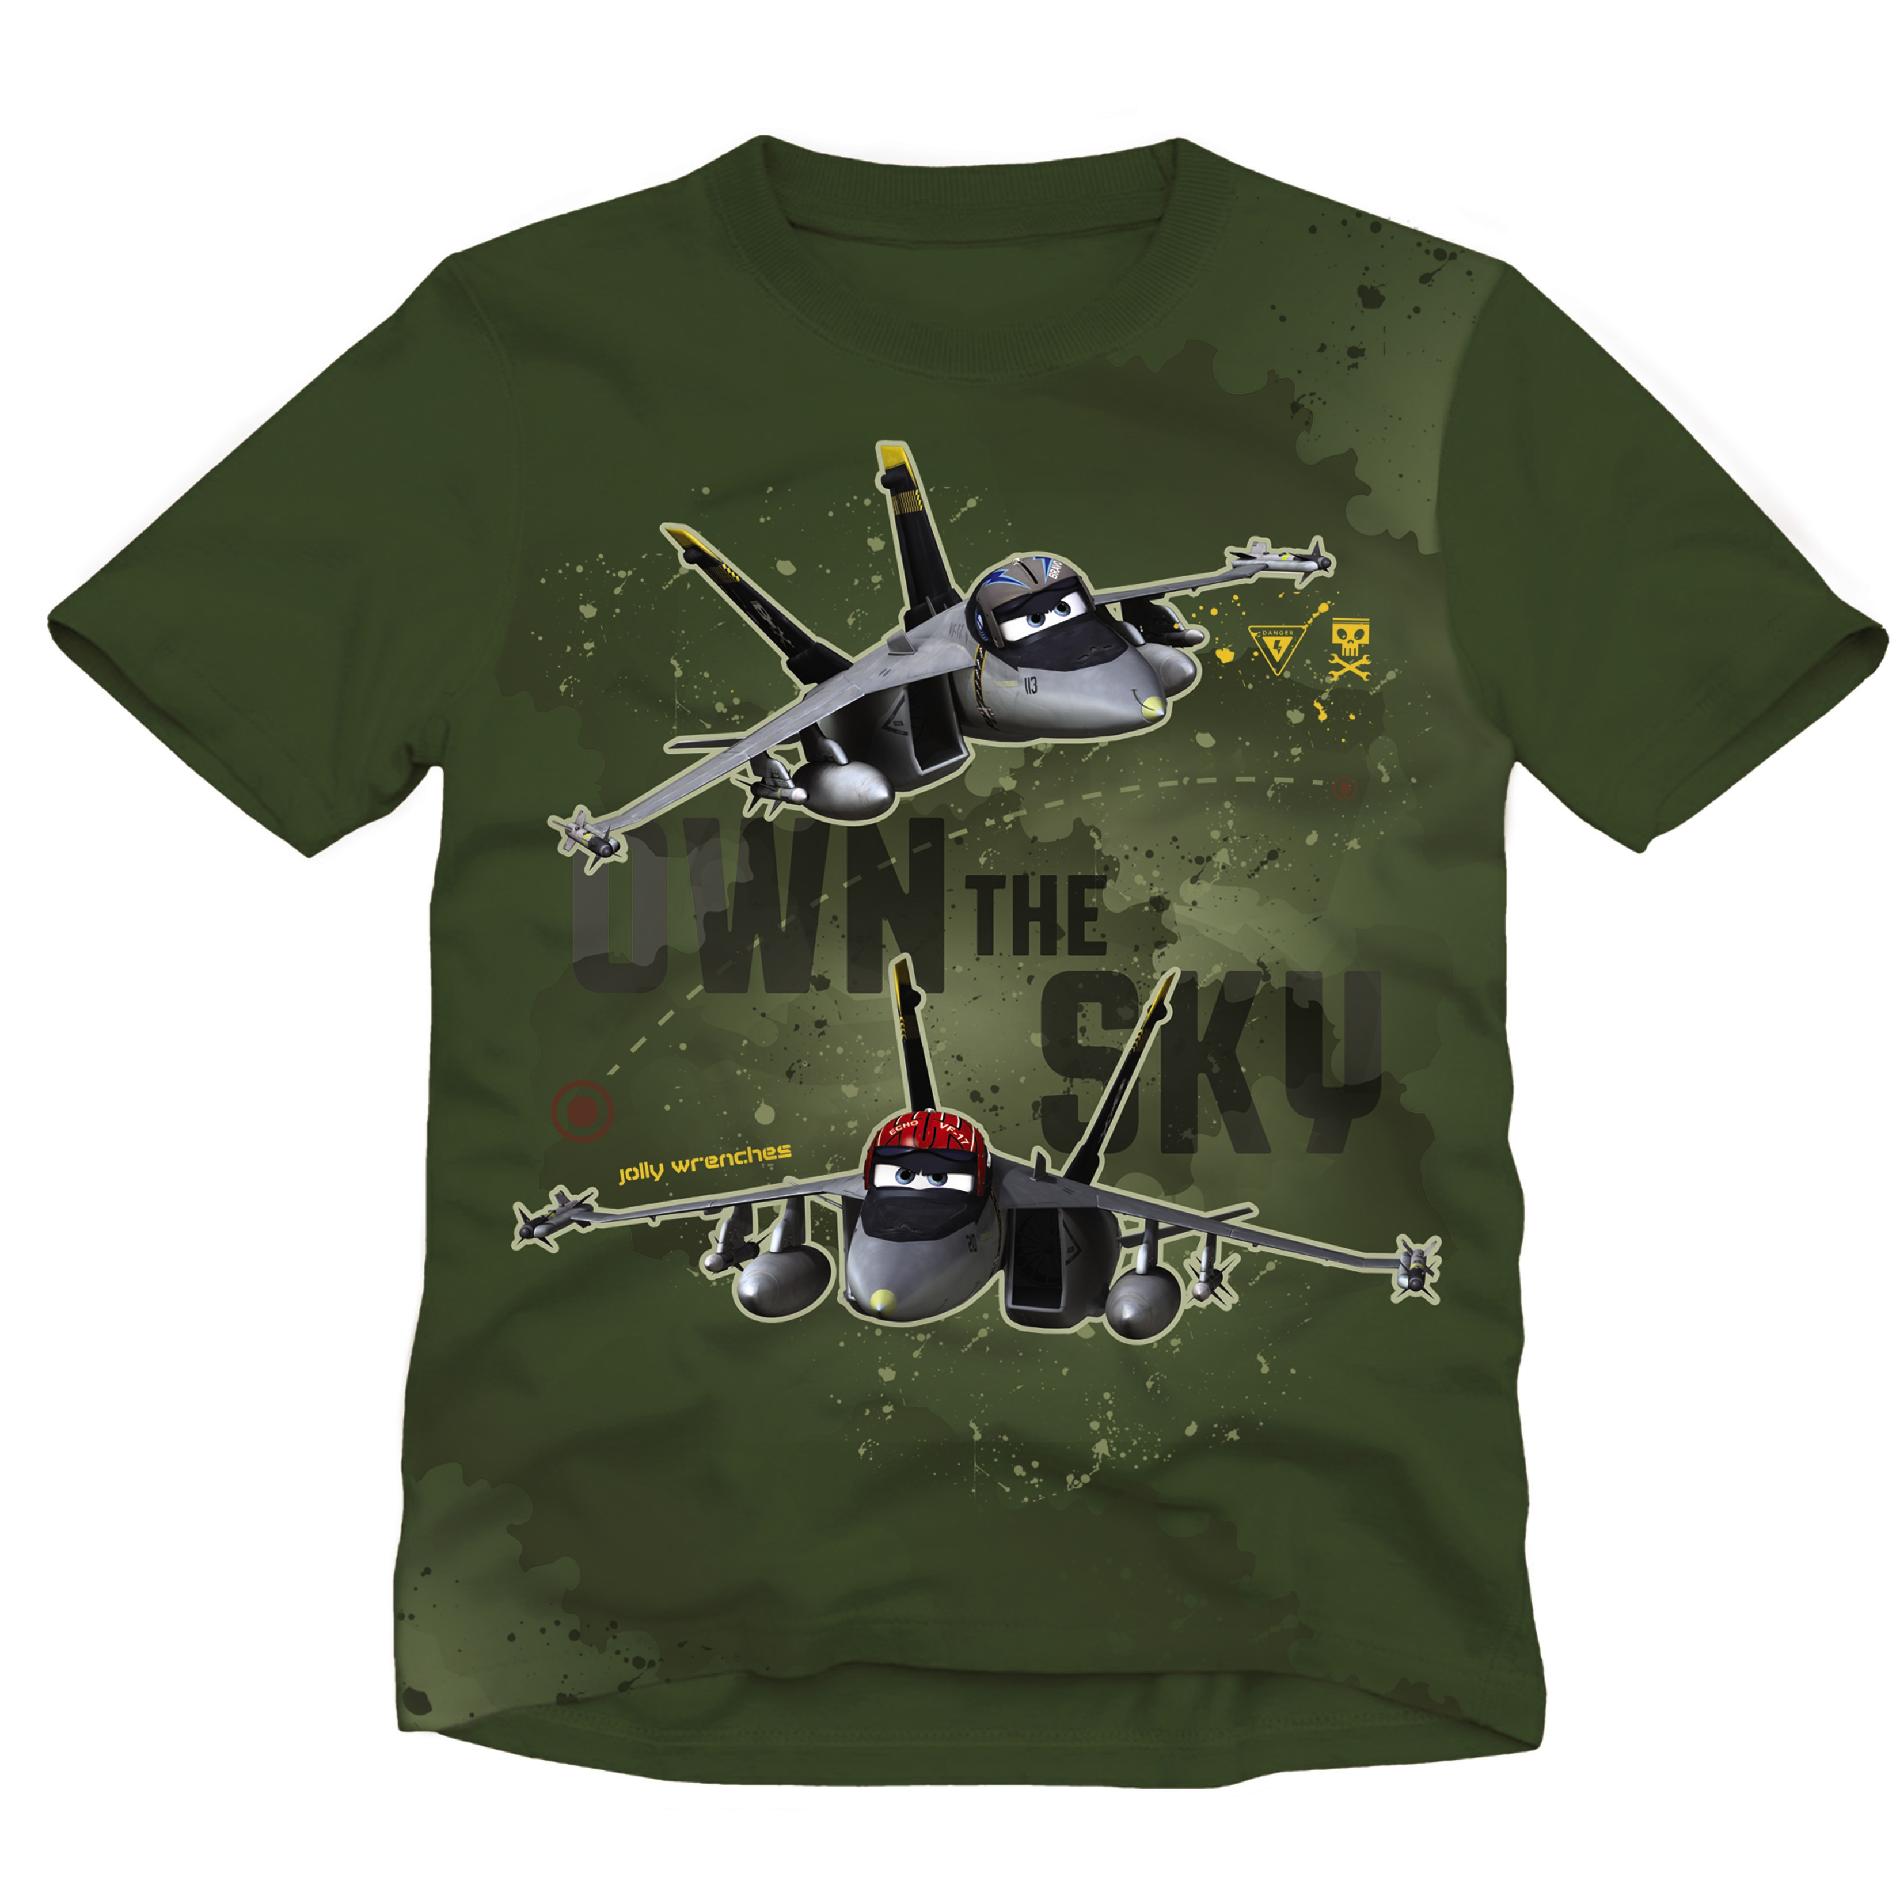 Disney Planes Toddler Boy's T-Shirt - Jolly Wrenches